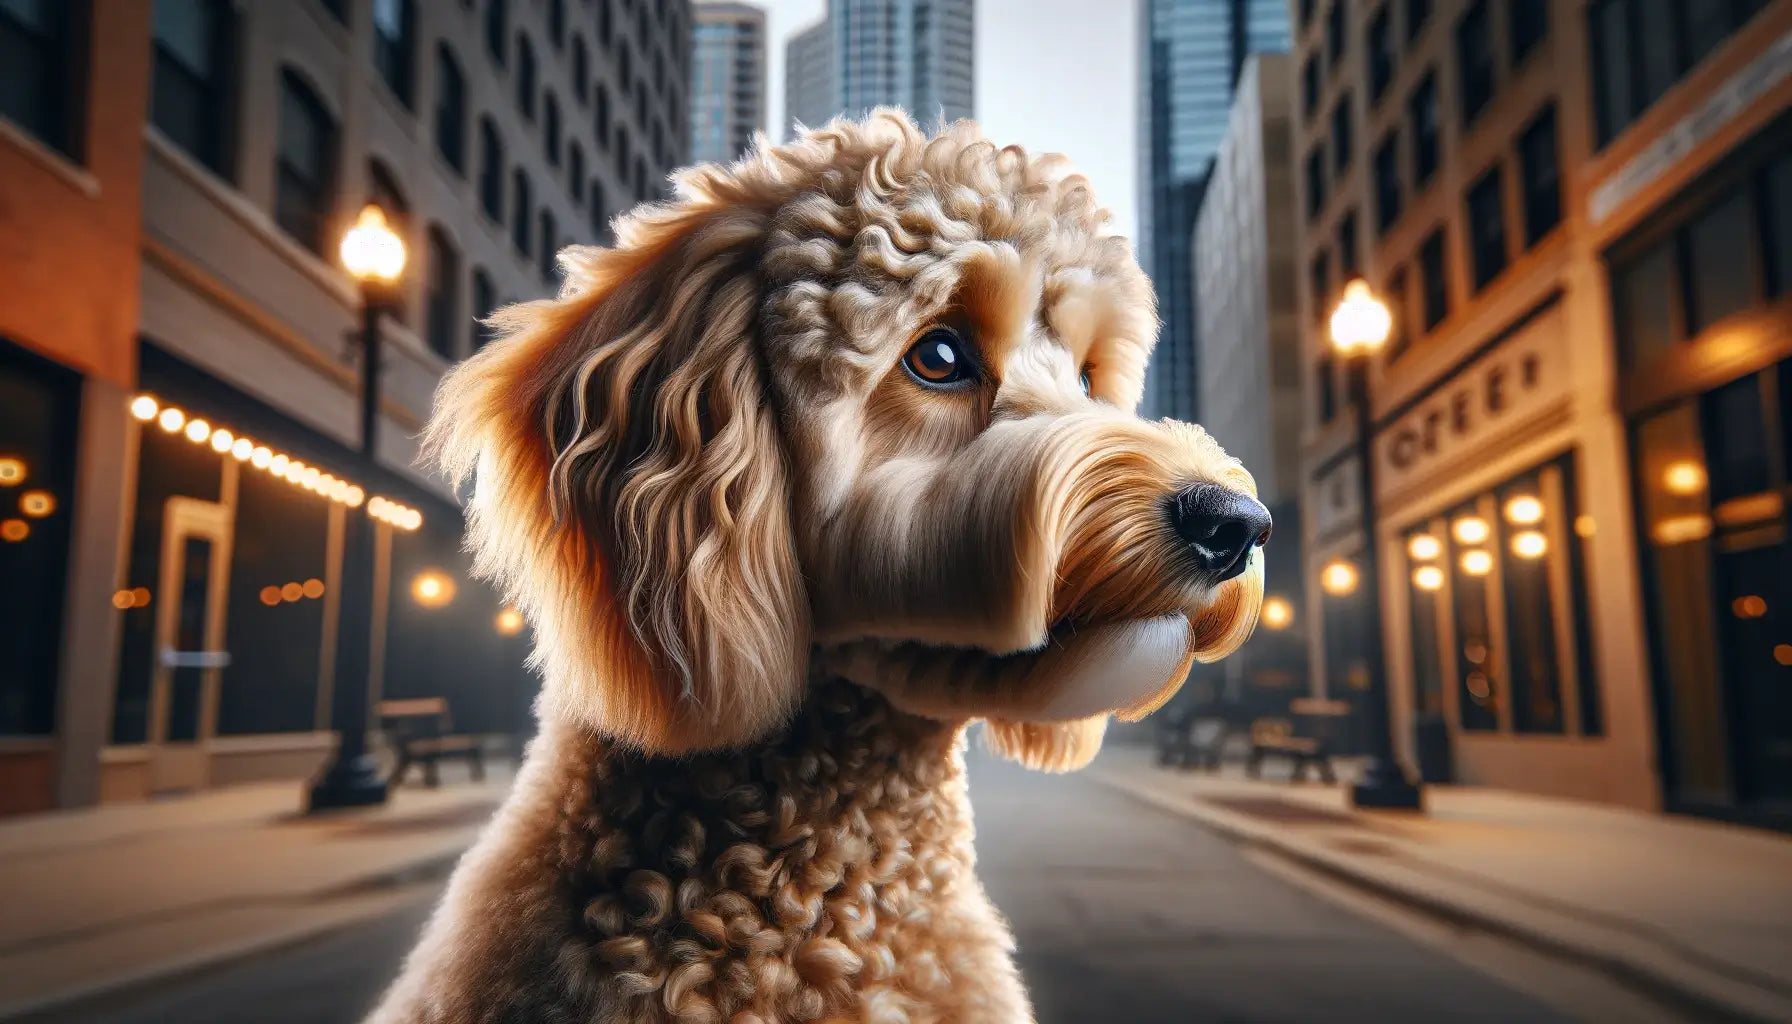 Teacup Goldendoodle showcased in a profile view within an urban setting, highlighting its alert expression and ability.